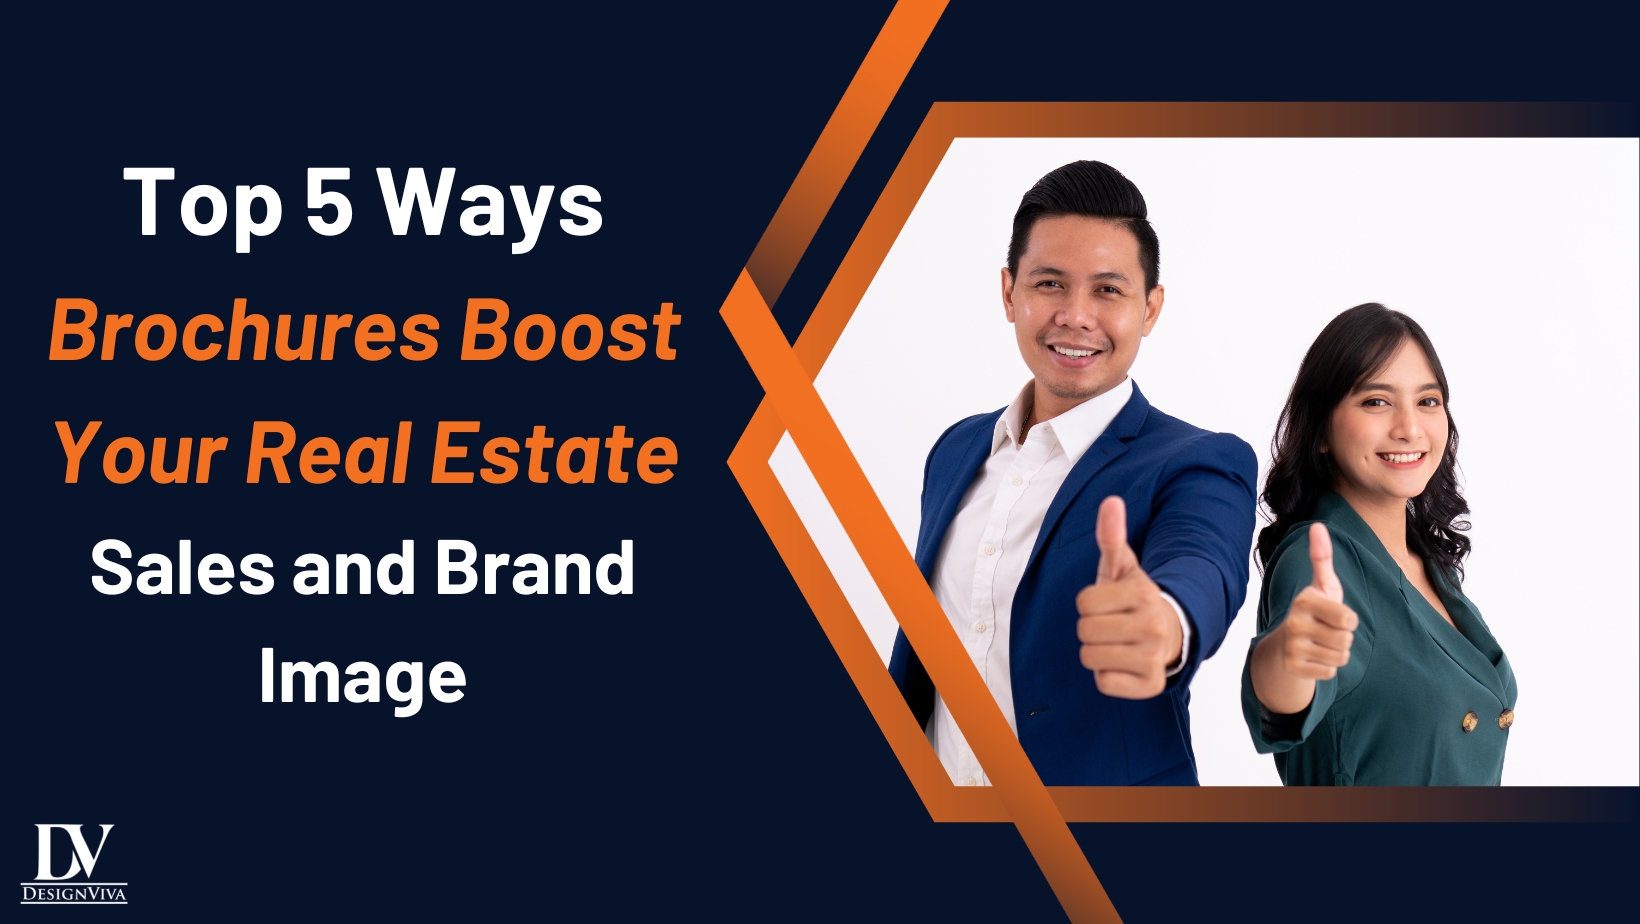 Top 5 Ways Brochures Boost Your Real Estate Sales and Brand Image